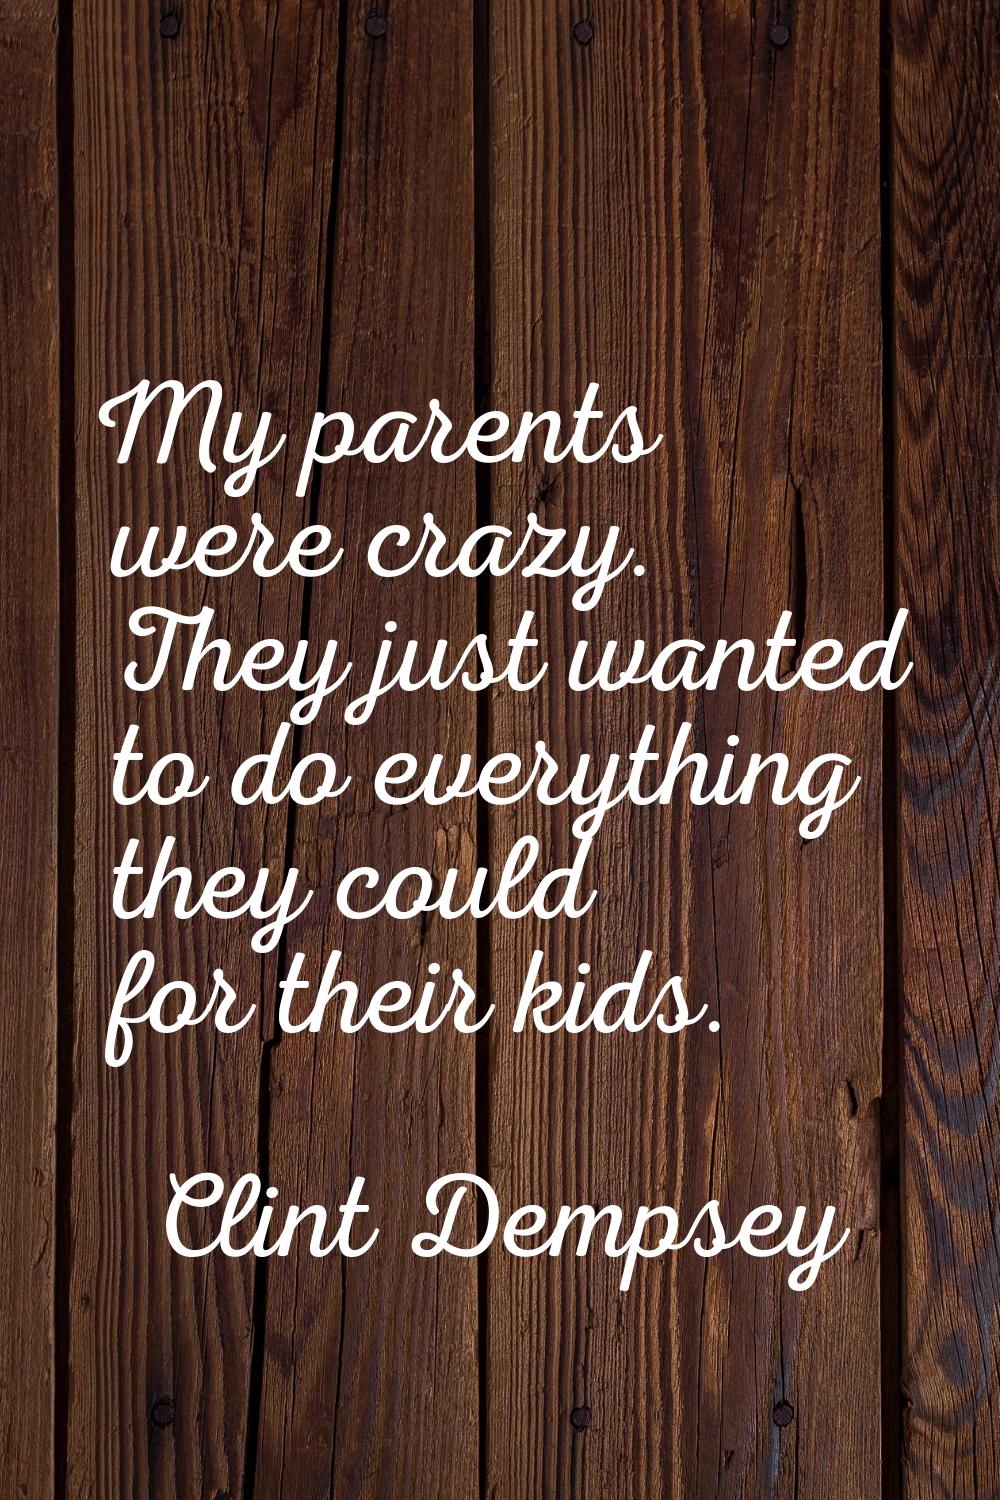 My parents were crazy. They just wanted to do everything they could for their kids.